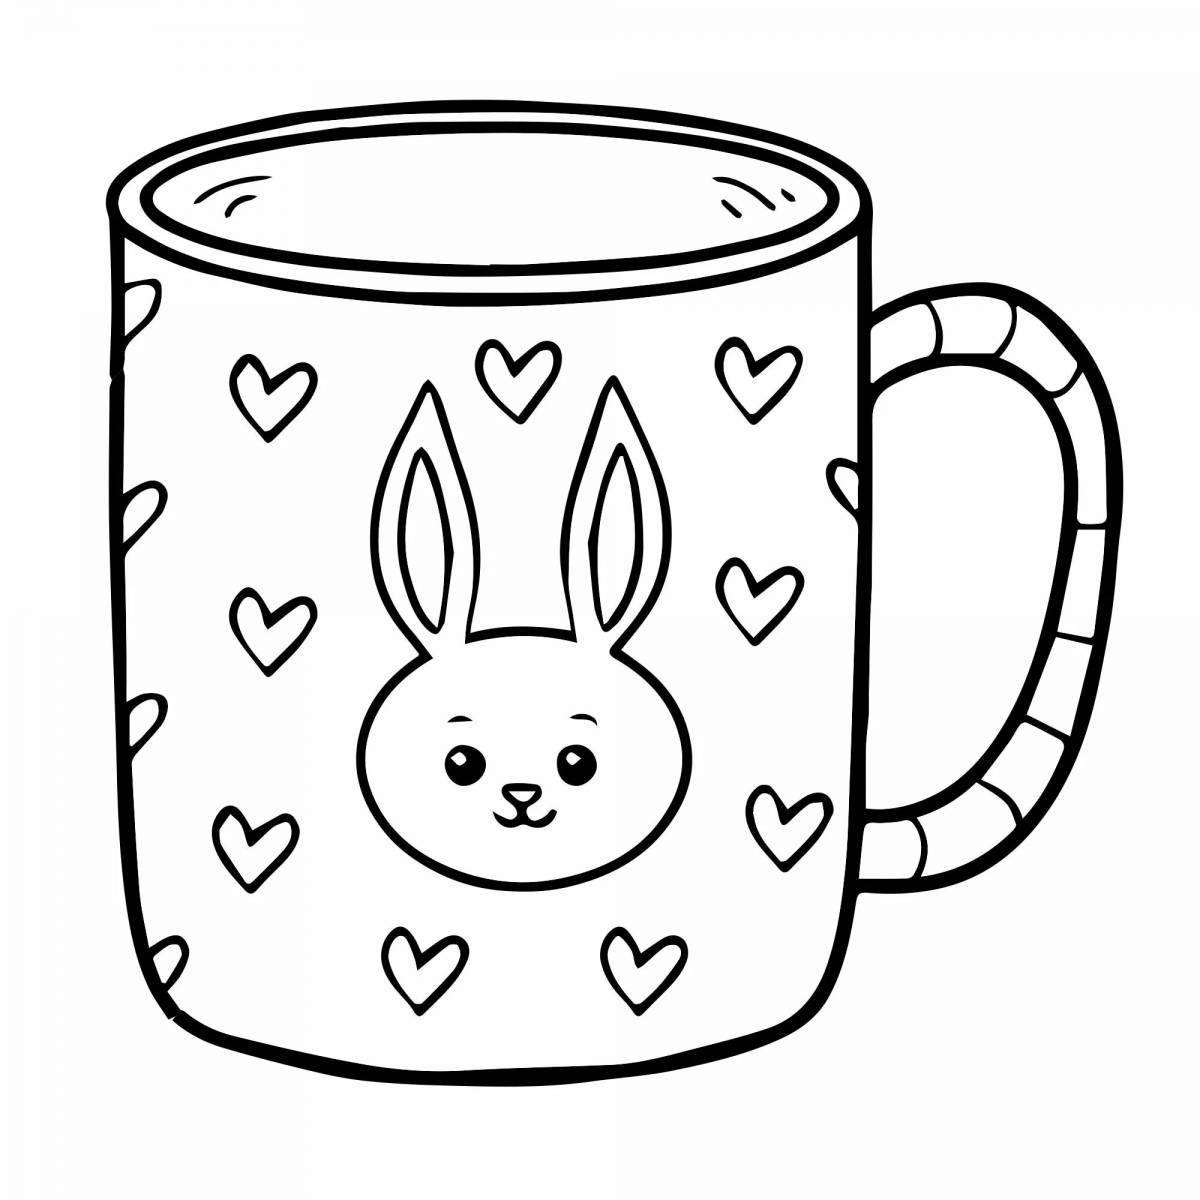 Adorable coloring cup for children